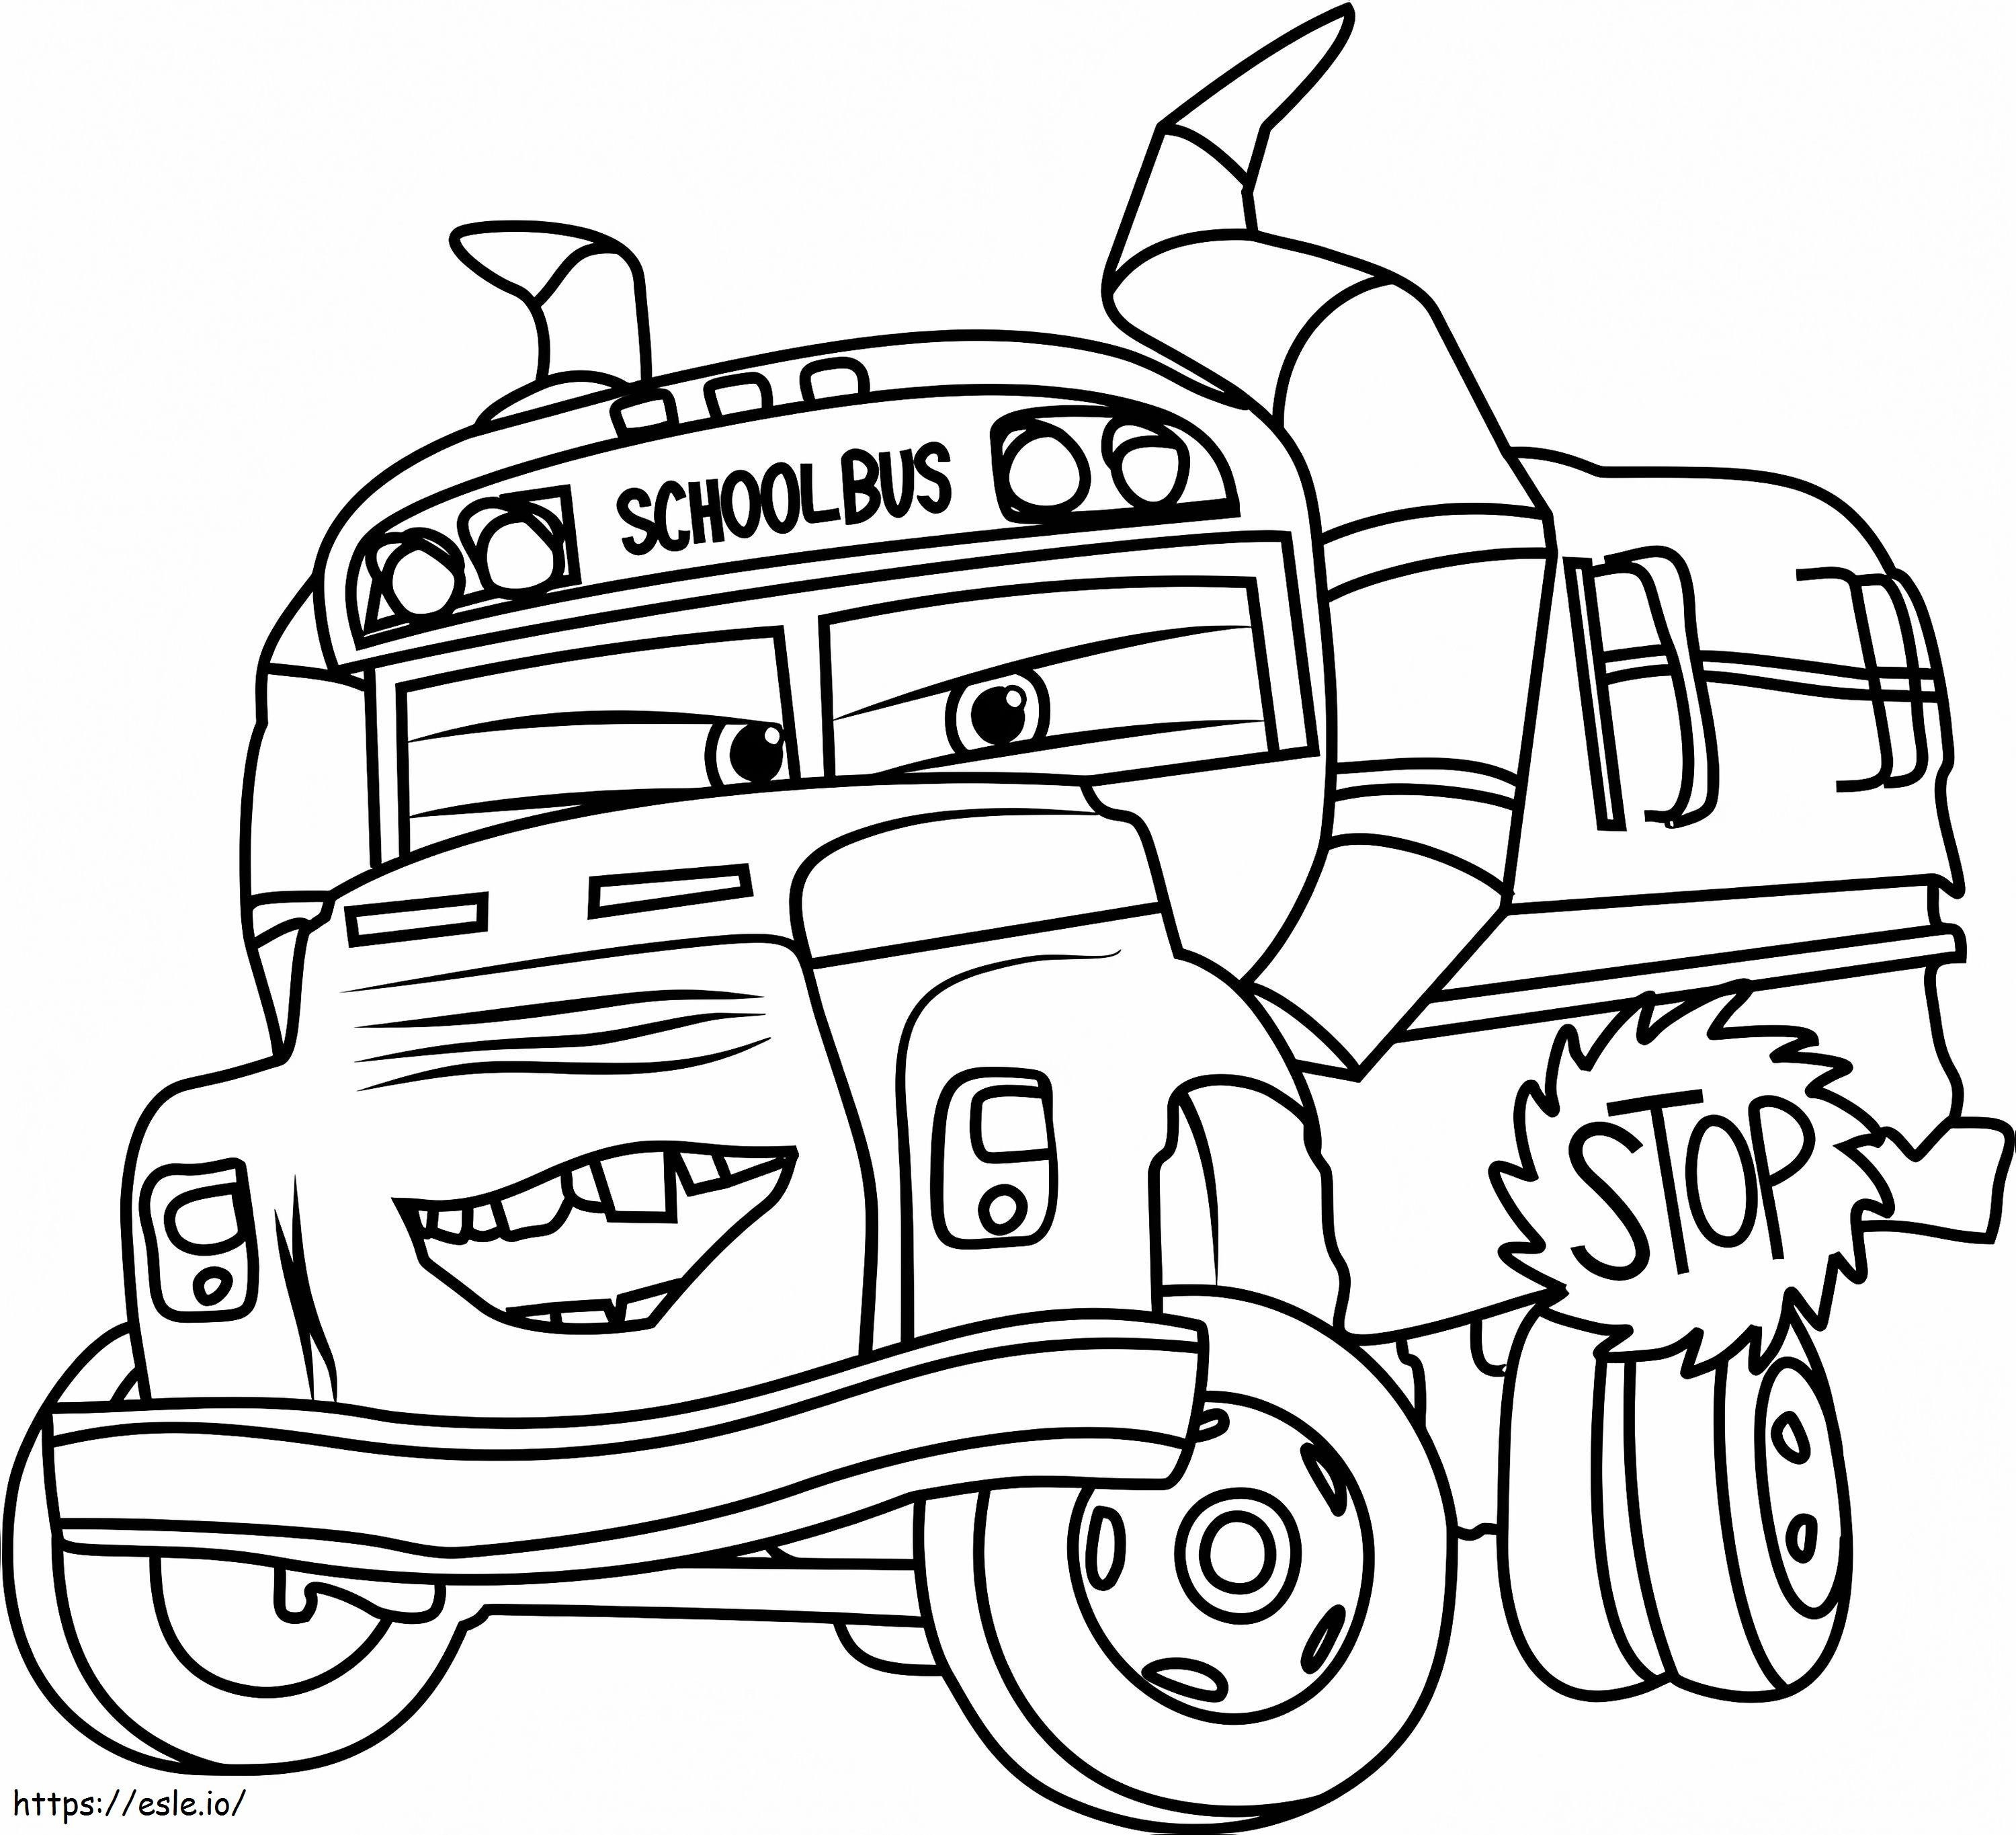 Miss Bunuelo Of Cars 3 coloring page